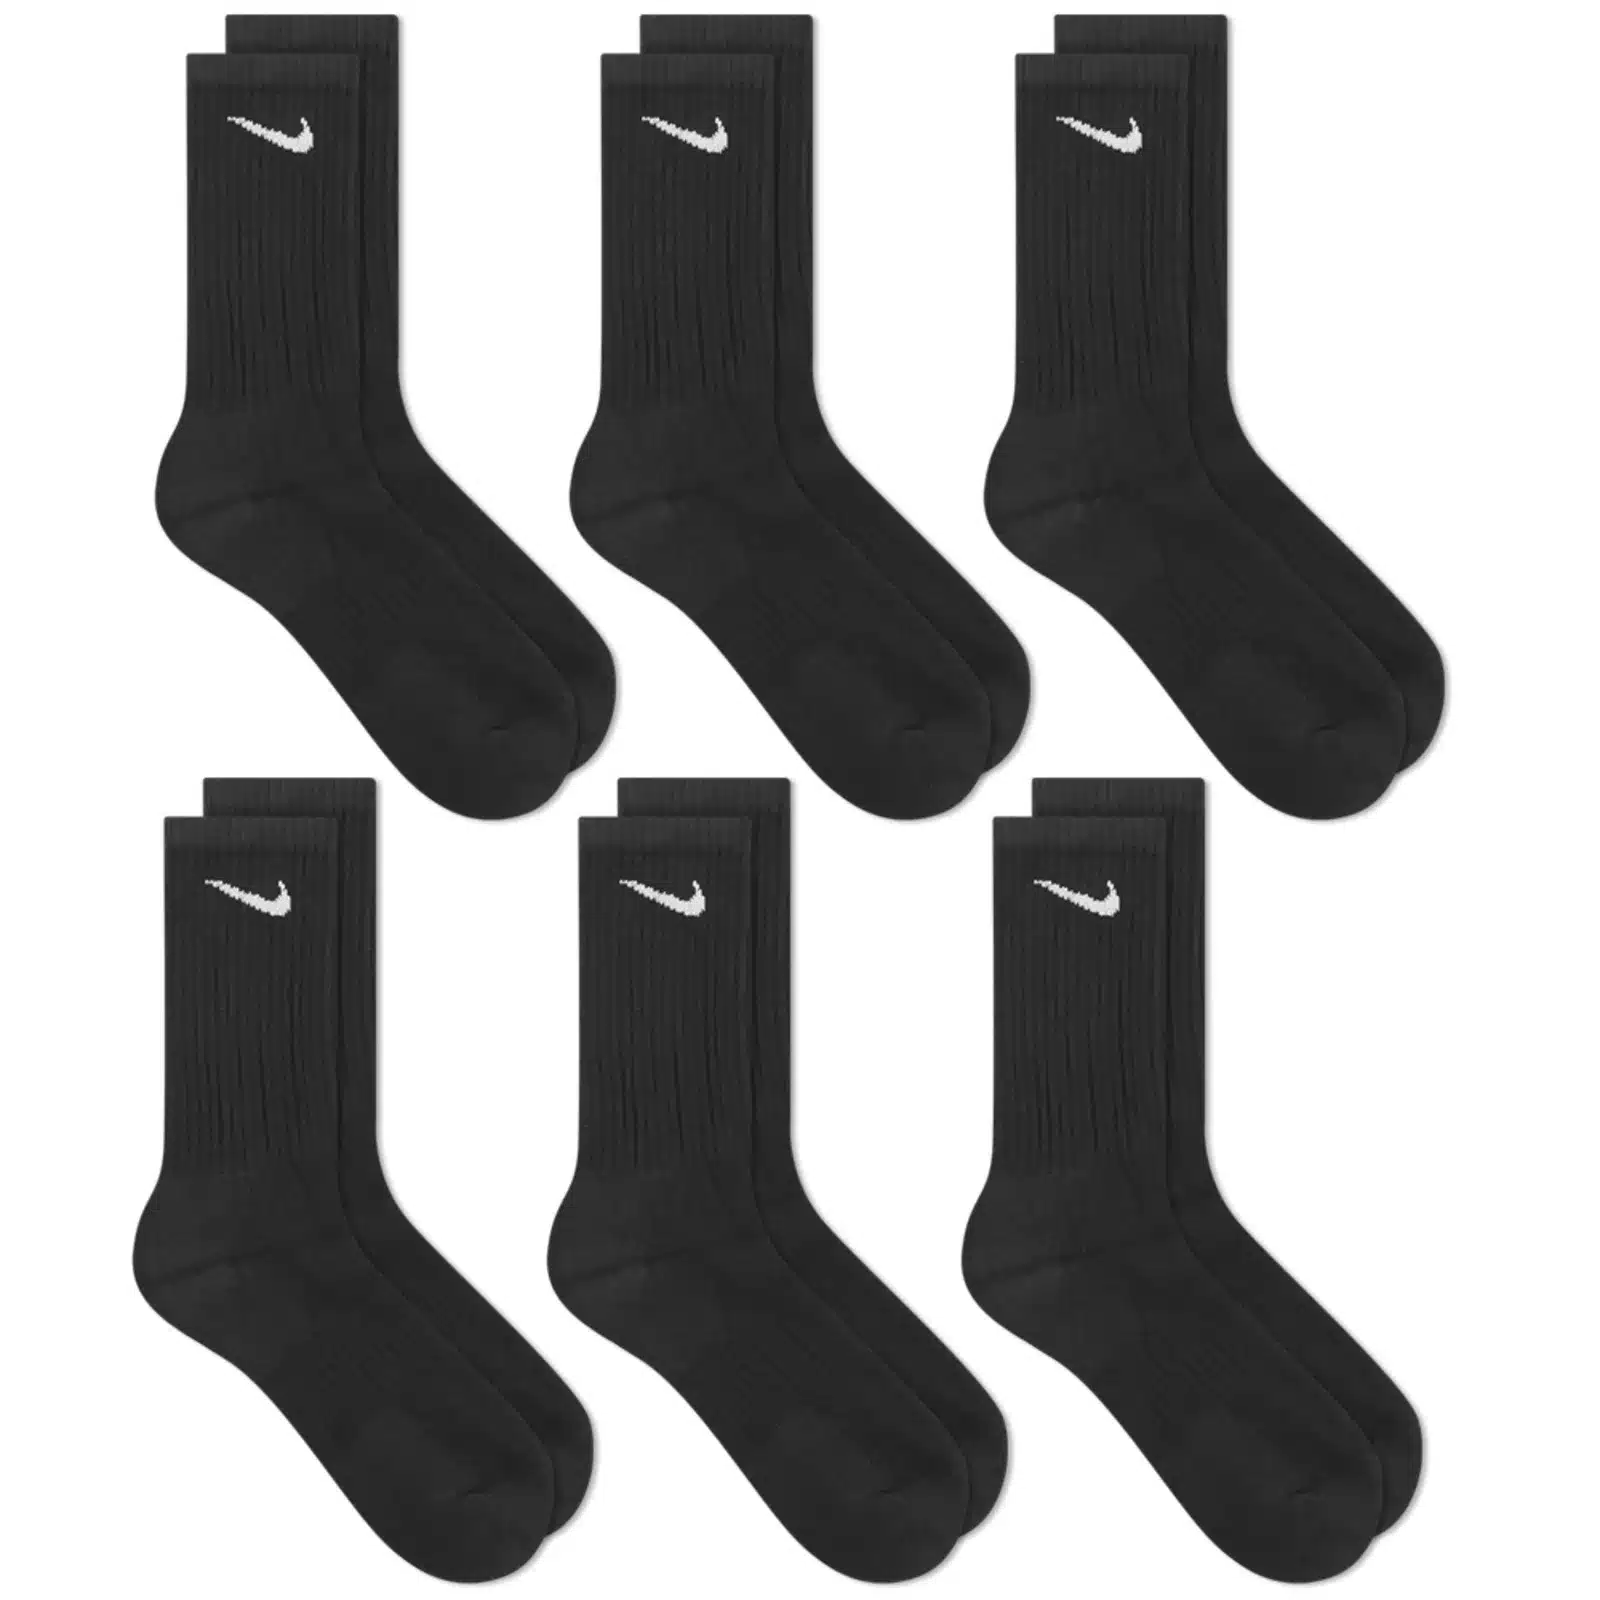 Nike Cotton Cushion Crew Sock – 6 Pack Discounts and Cashback